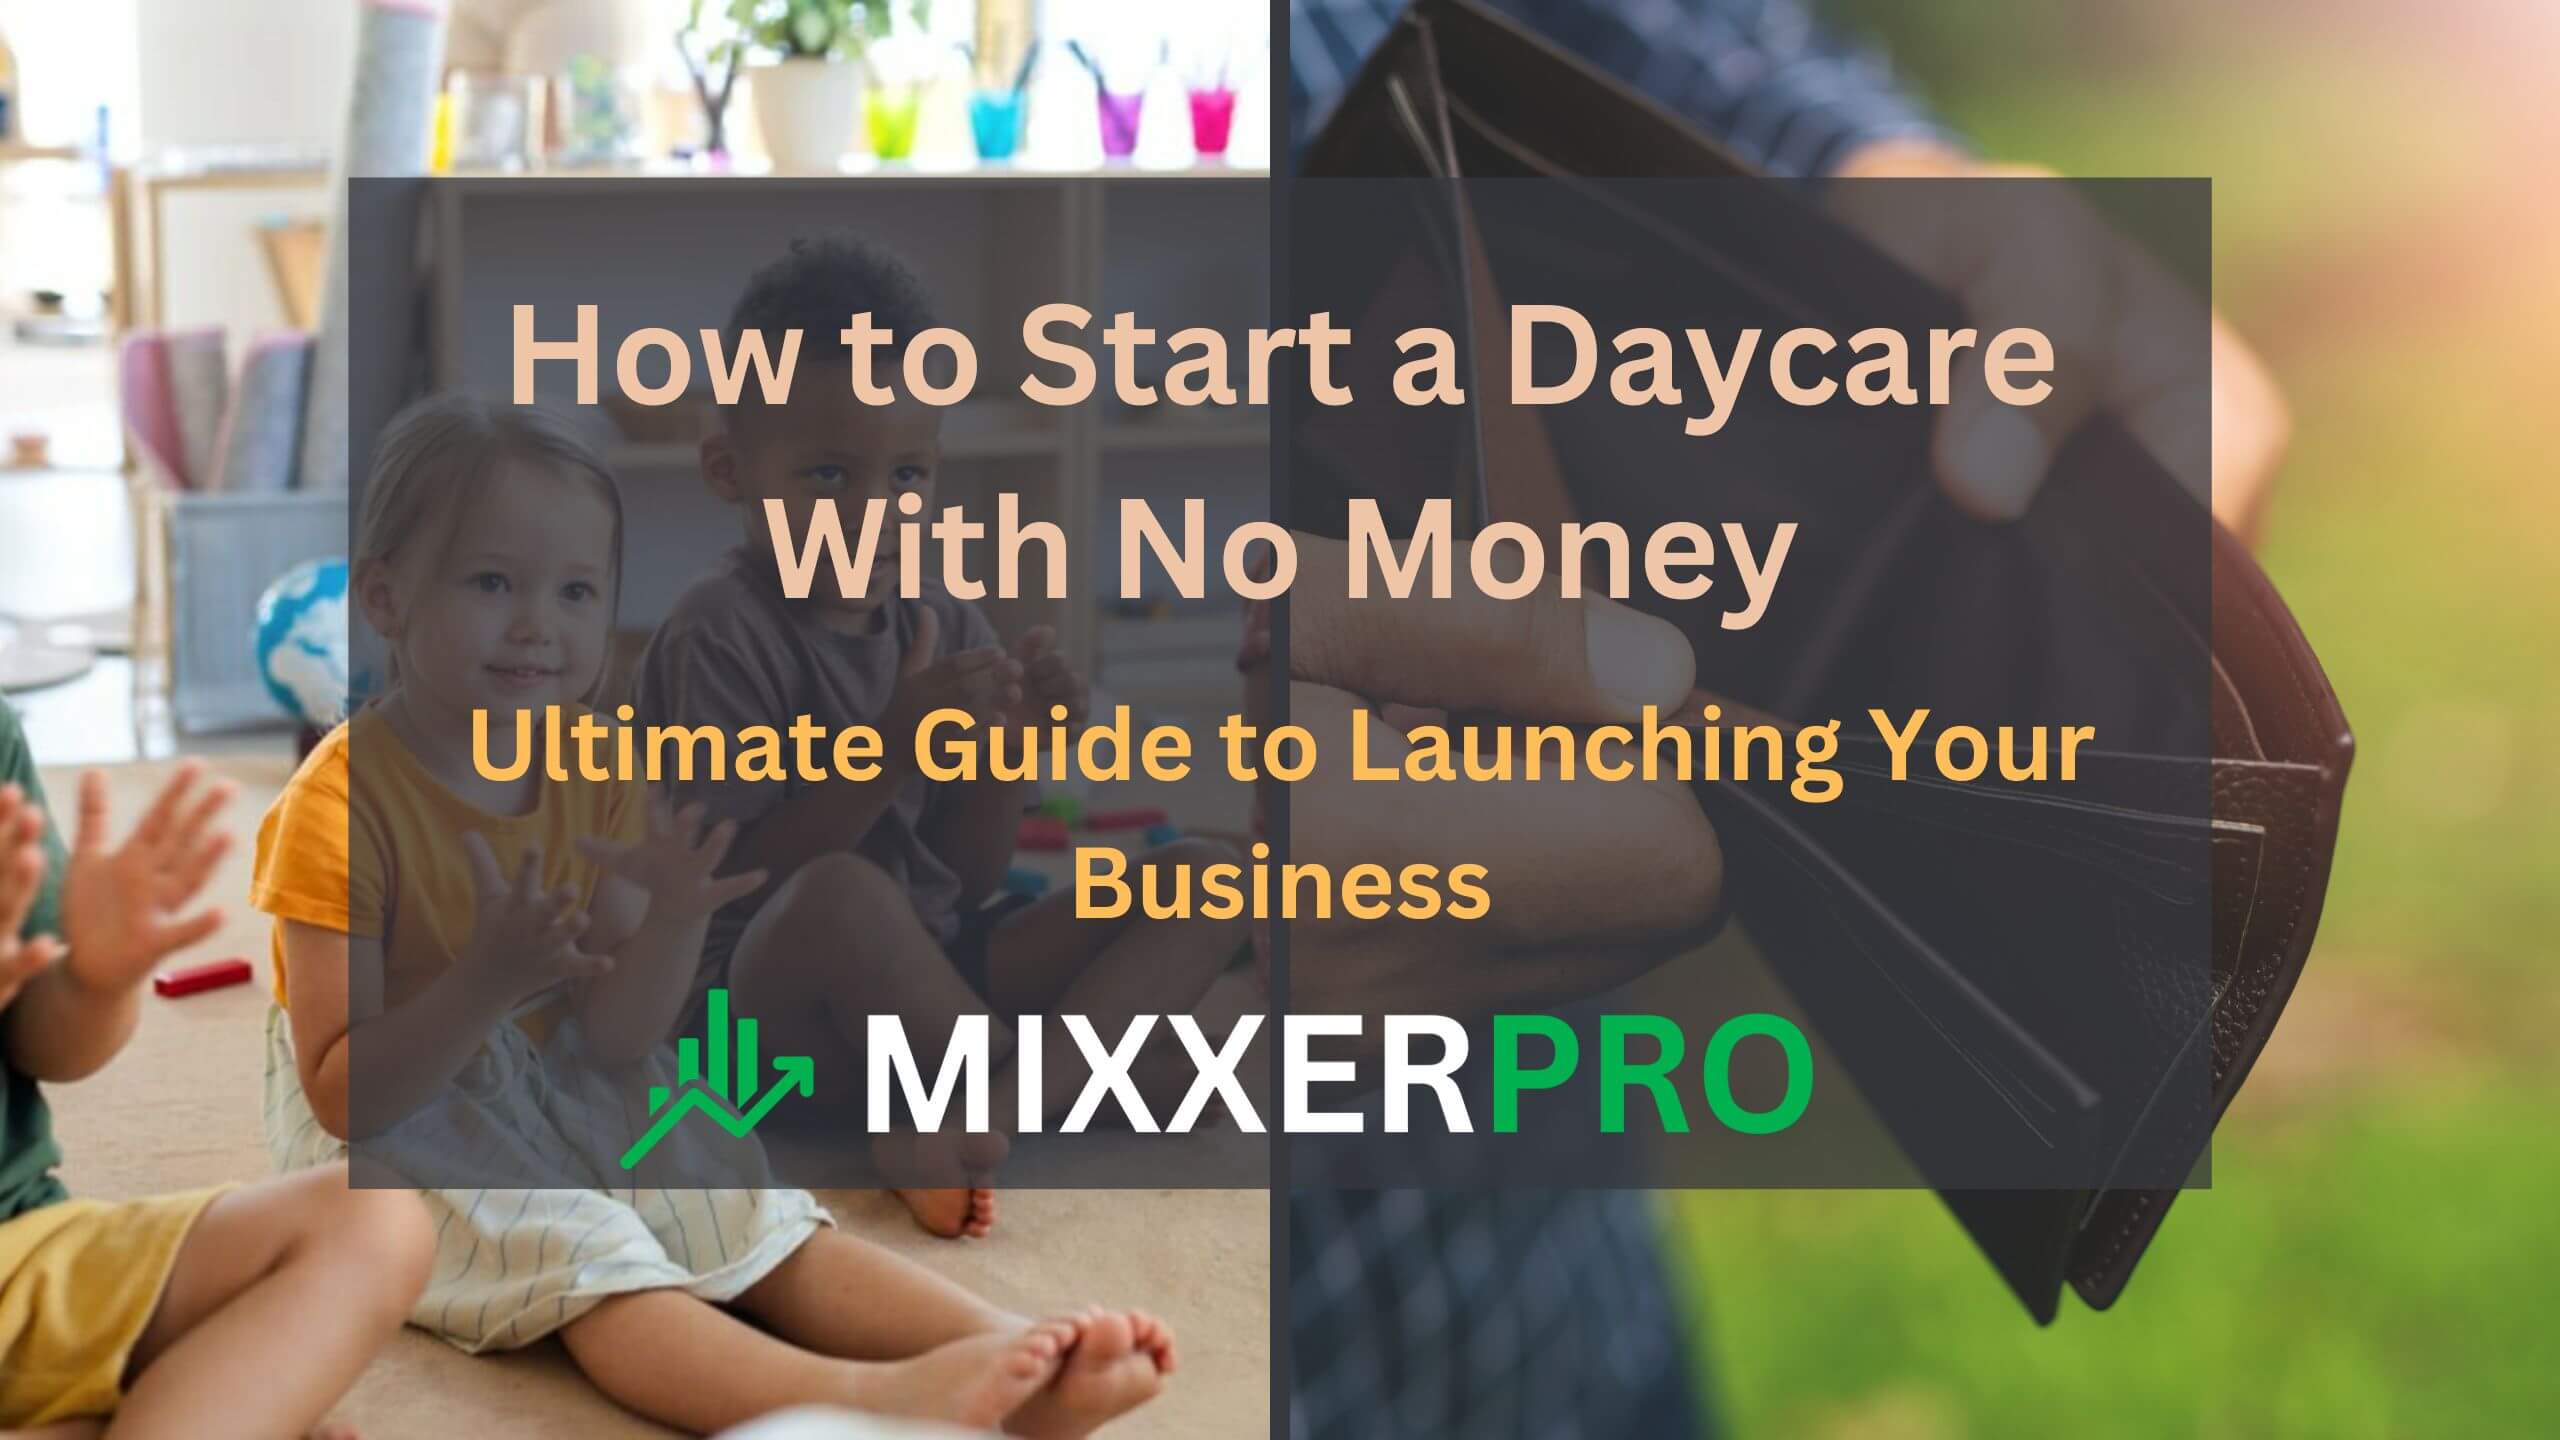 You are currently viewing How to Start a Daycare With No Money: Ultimate Guide to Launching Your Business